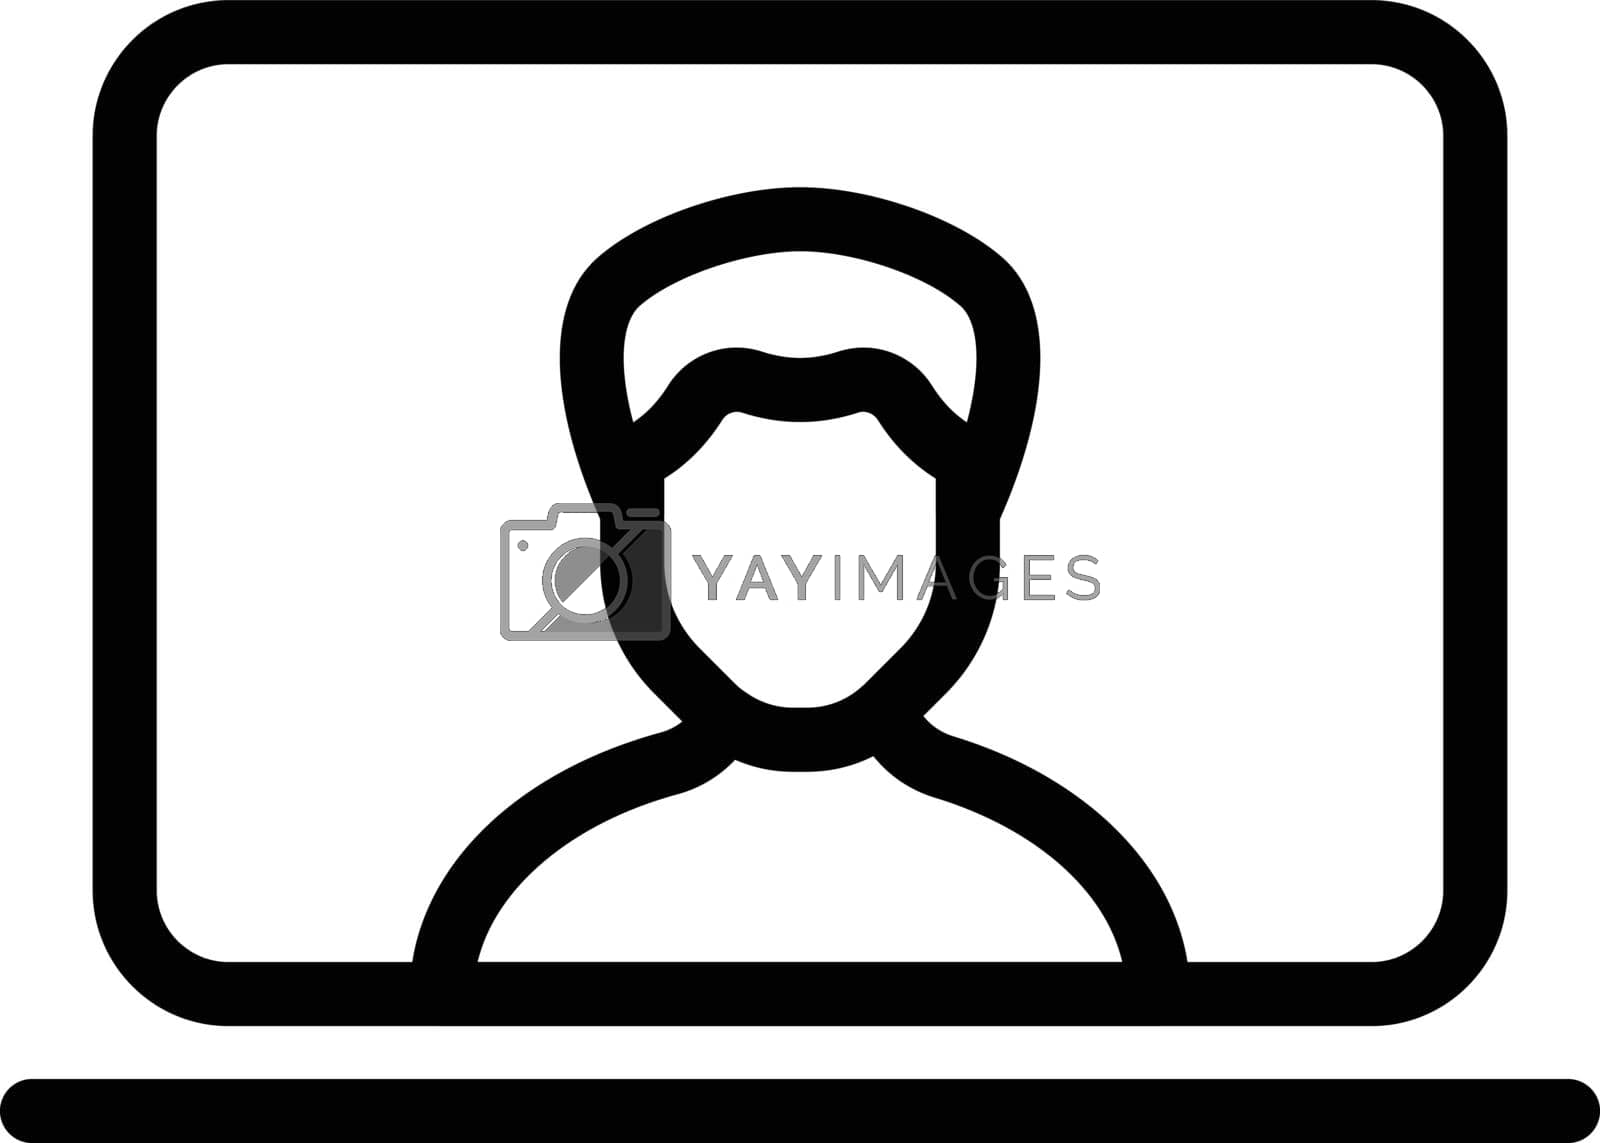 Royalty free image of profile by vectorstall